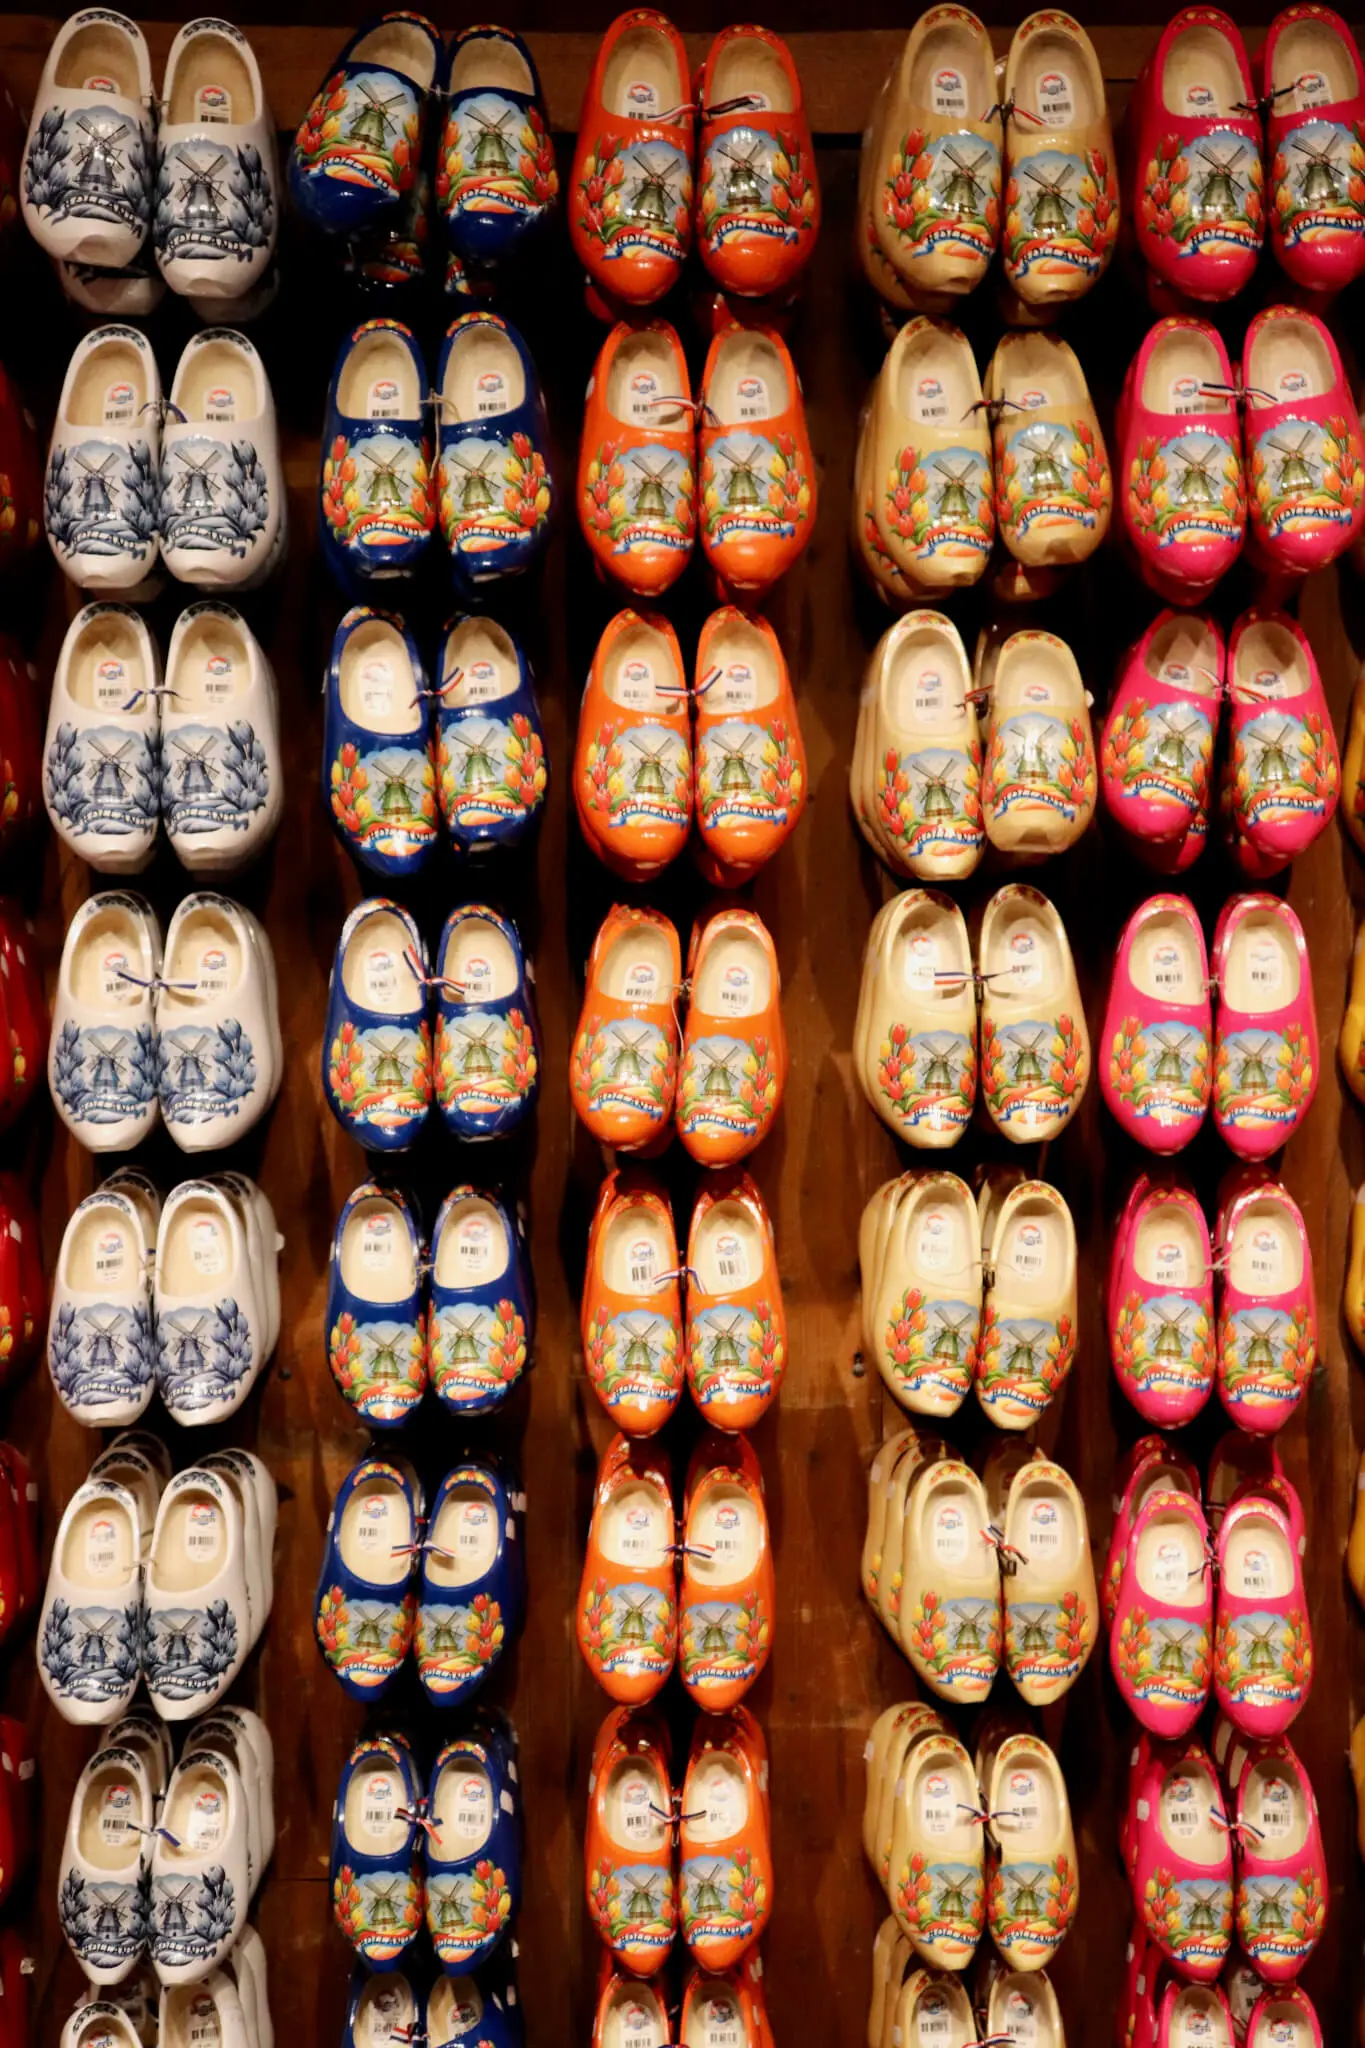 Colorful souvenir wooden shoes on display